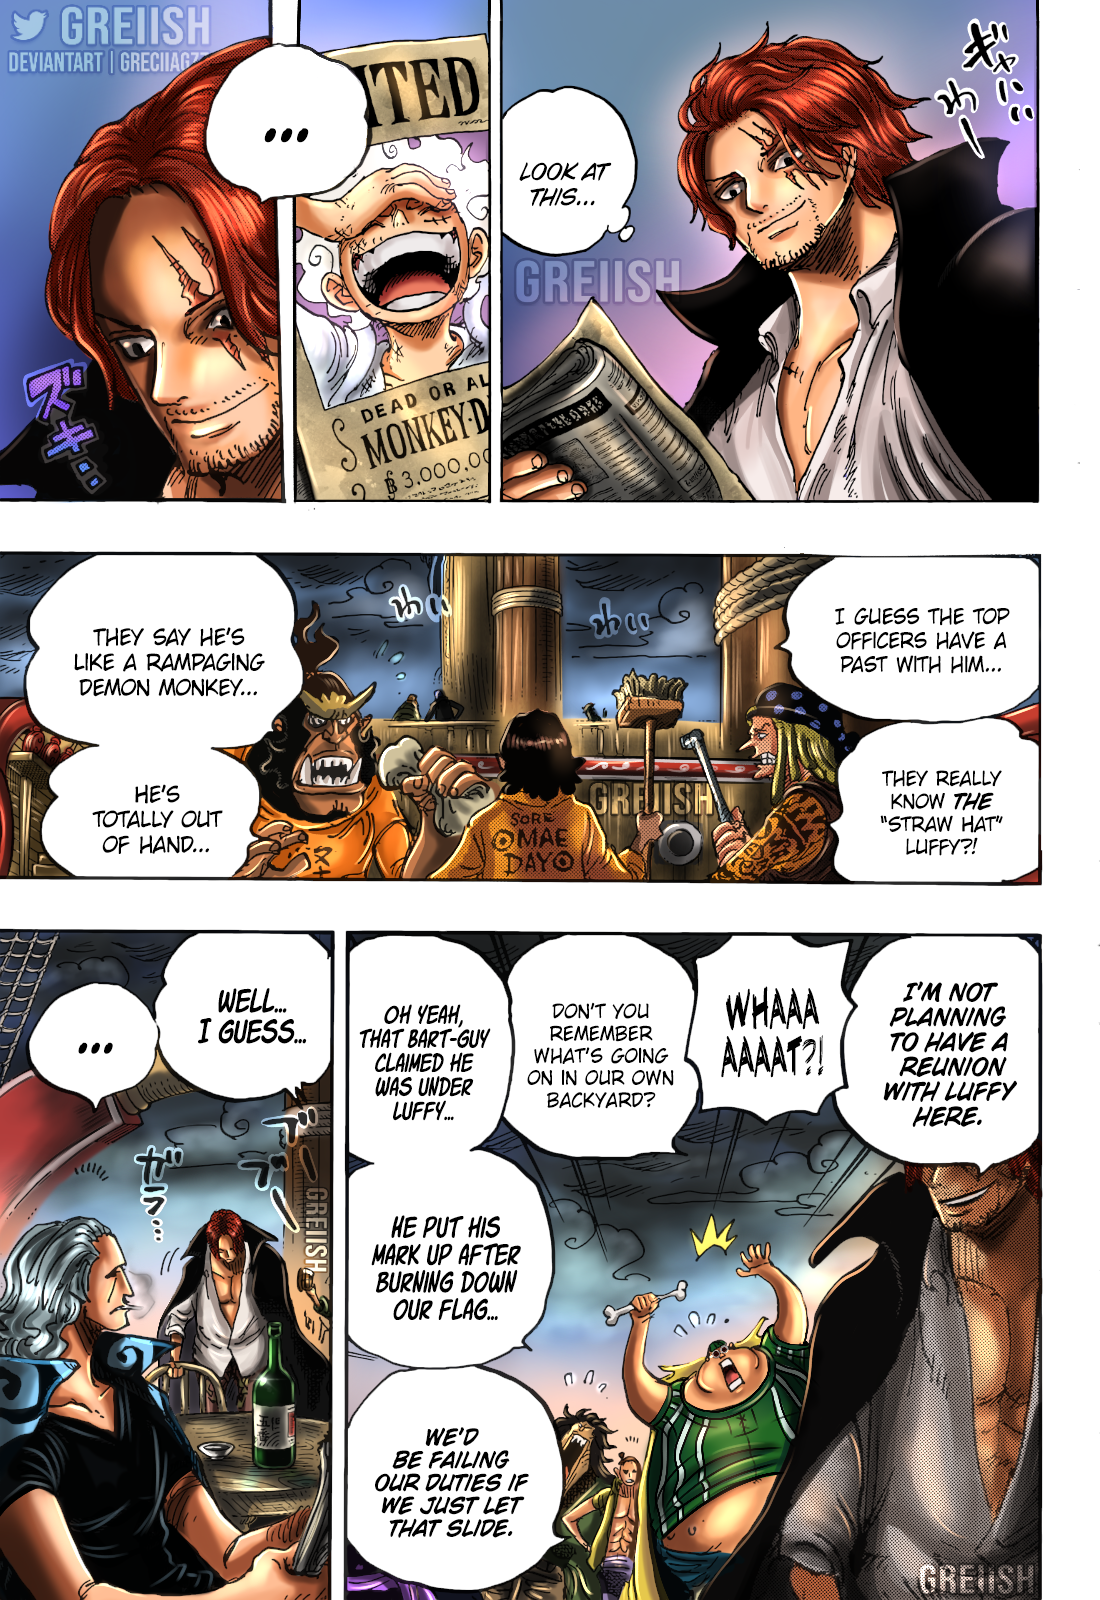 Coloring of One Piece Chapter 1065 - EIICHIRO ODA. by badhri27 on